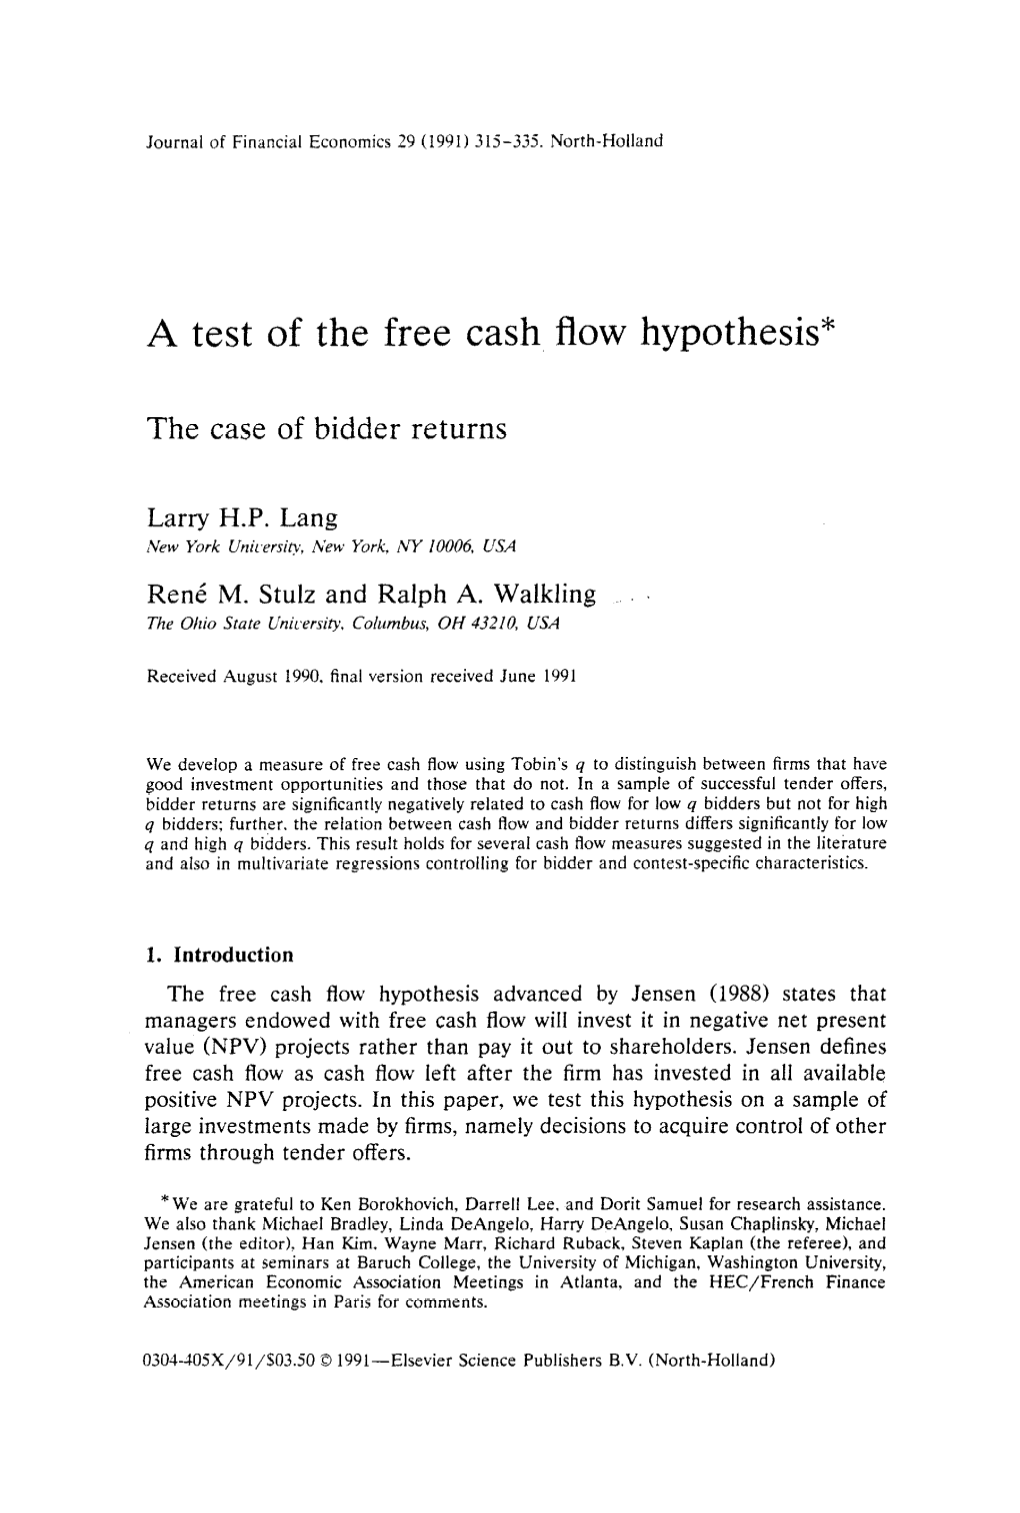 A Test of the Free Cash Flow Hypothesis*